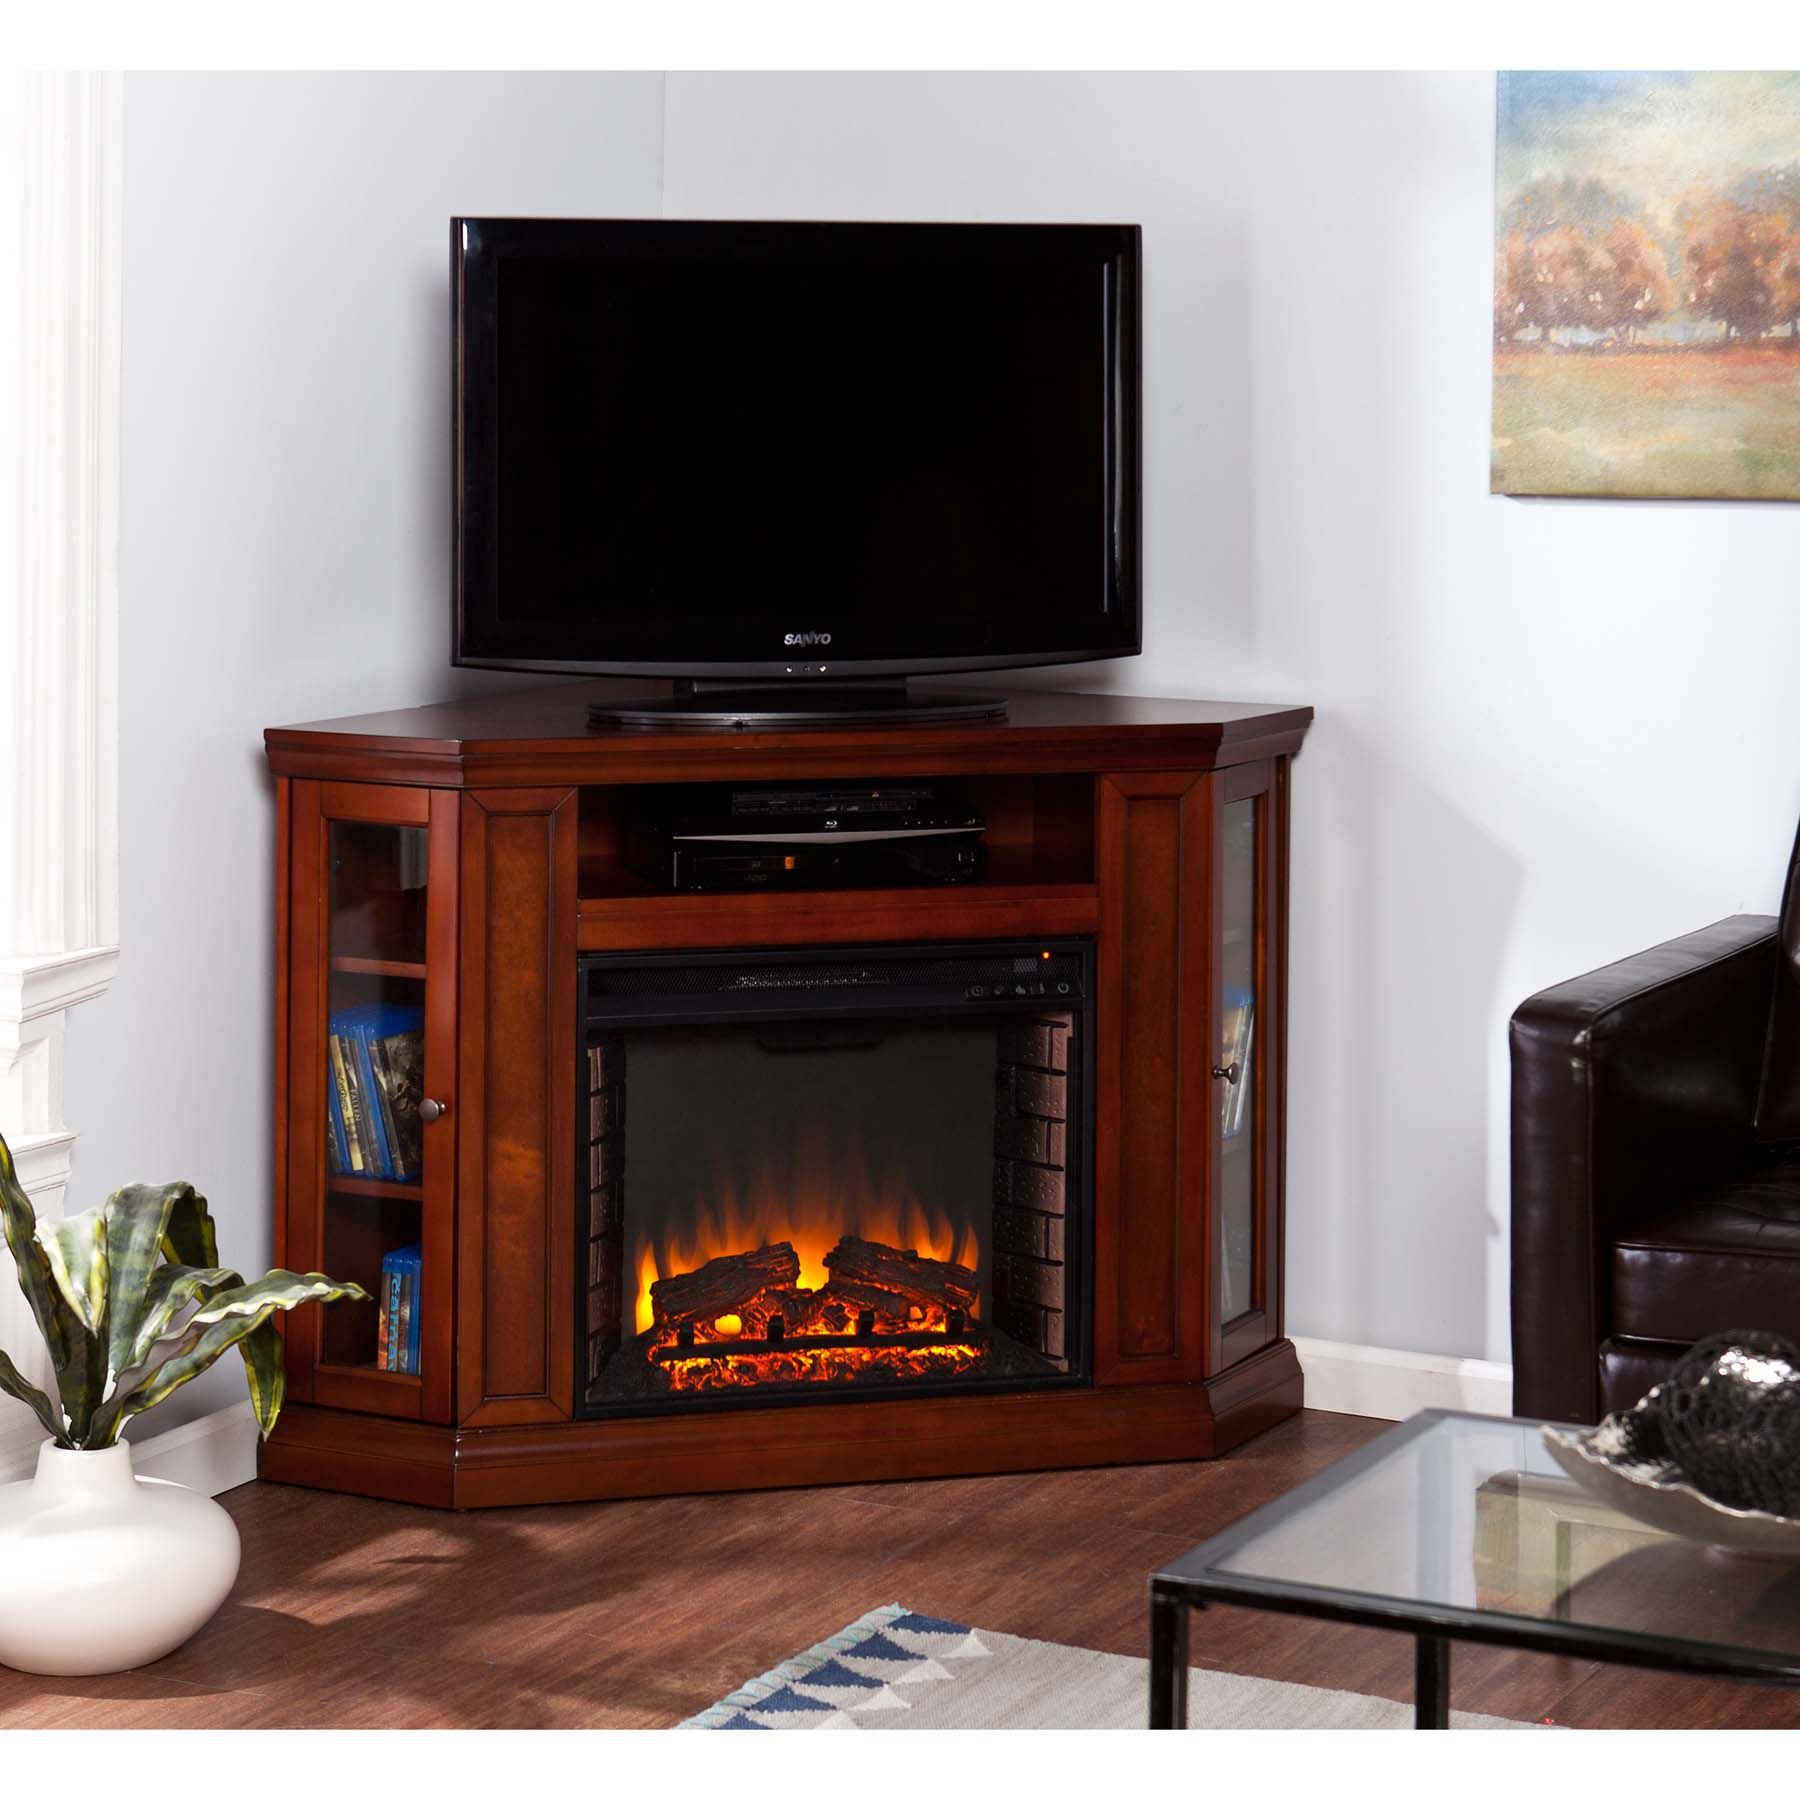 Electric Fireplace Heater Tv Stand Unique 42 Best Rustic Fireplace Images